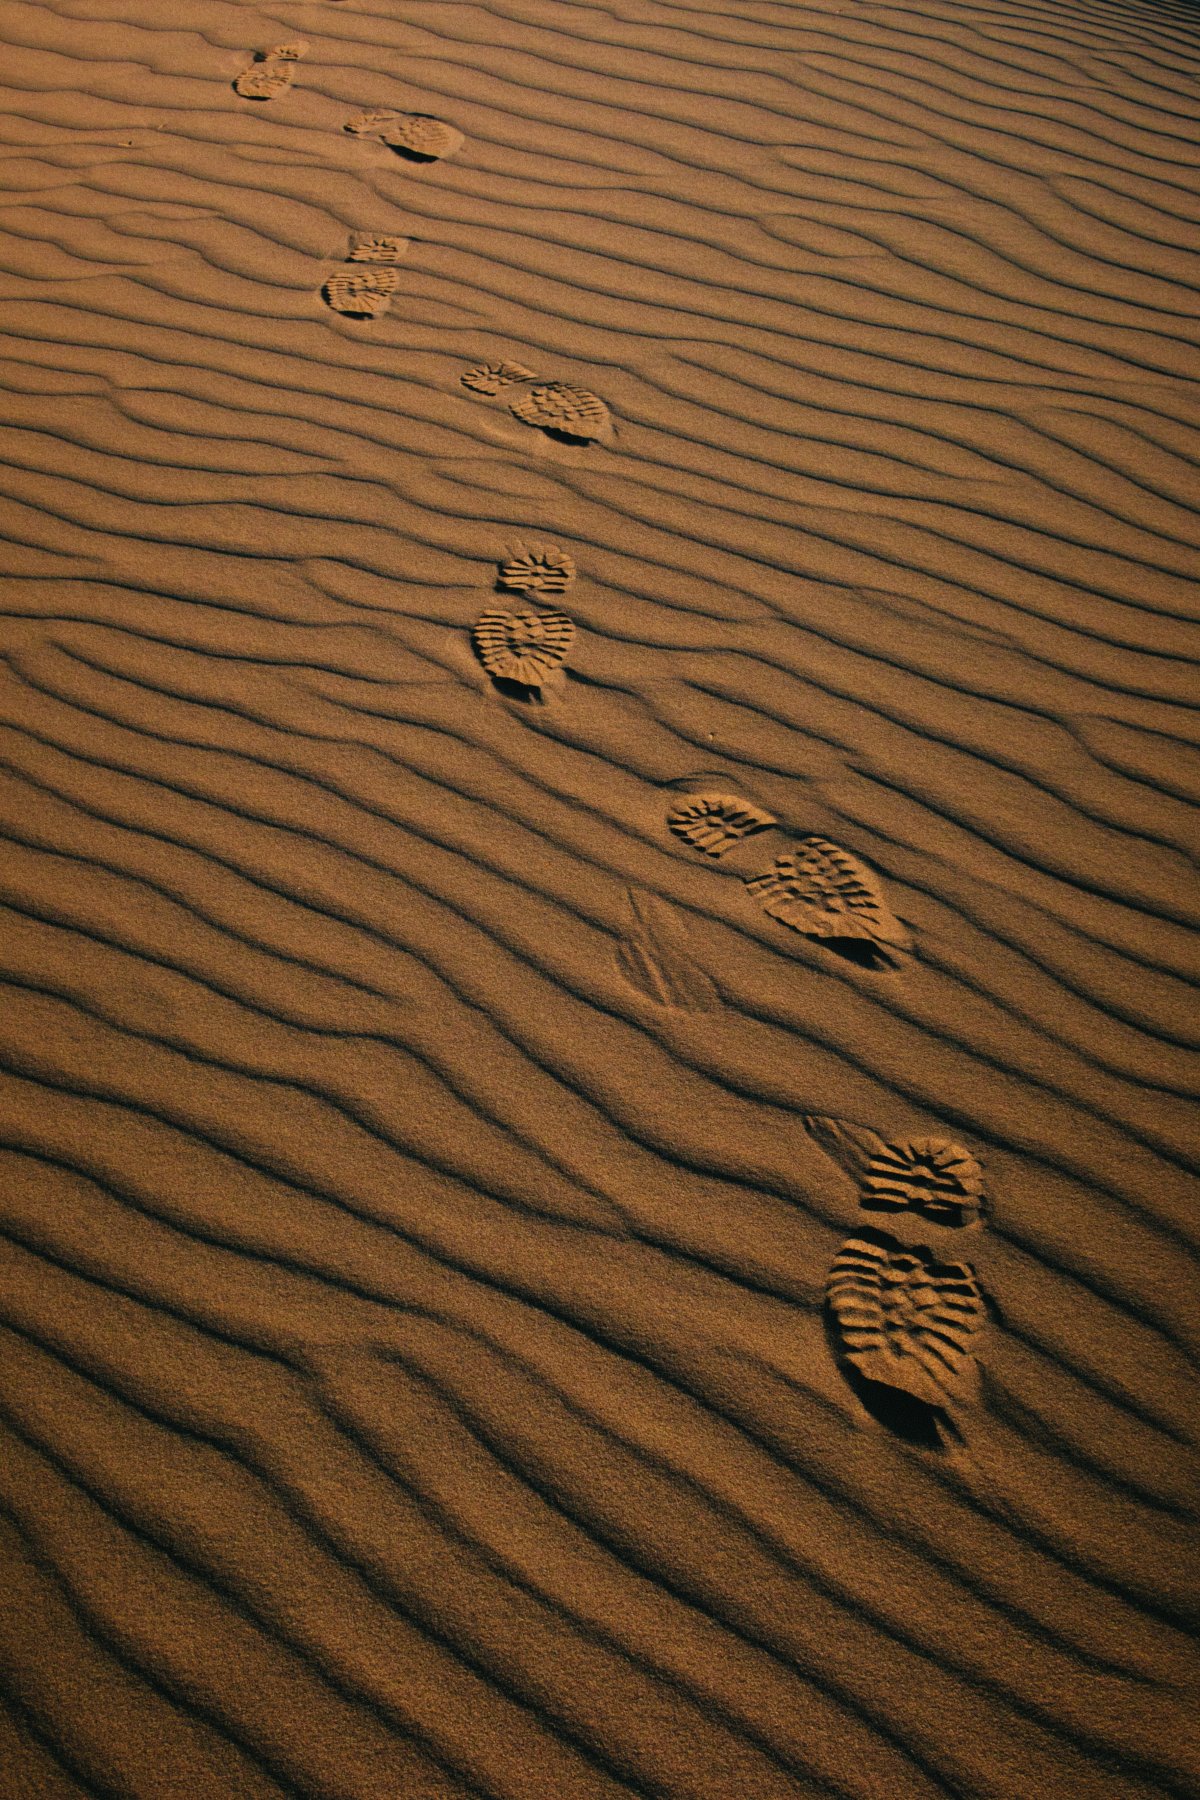 Pictures of footprints in the desert